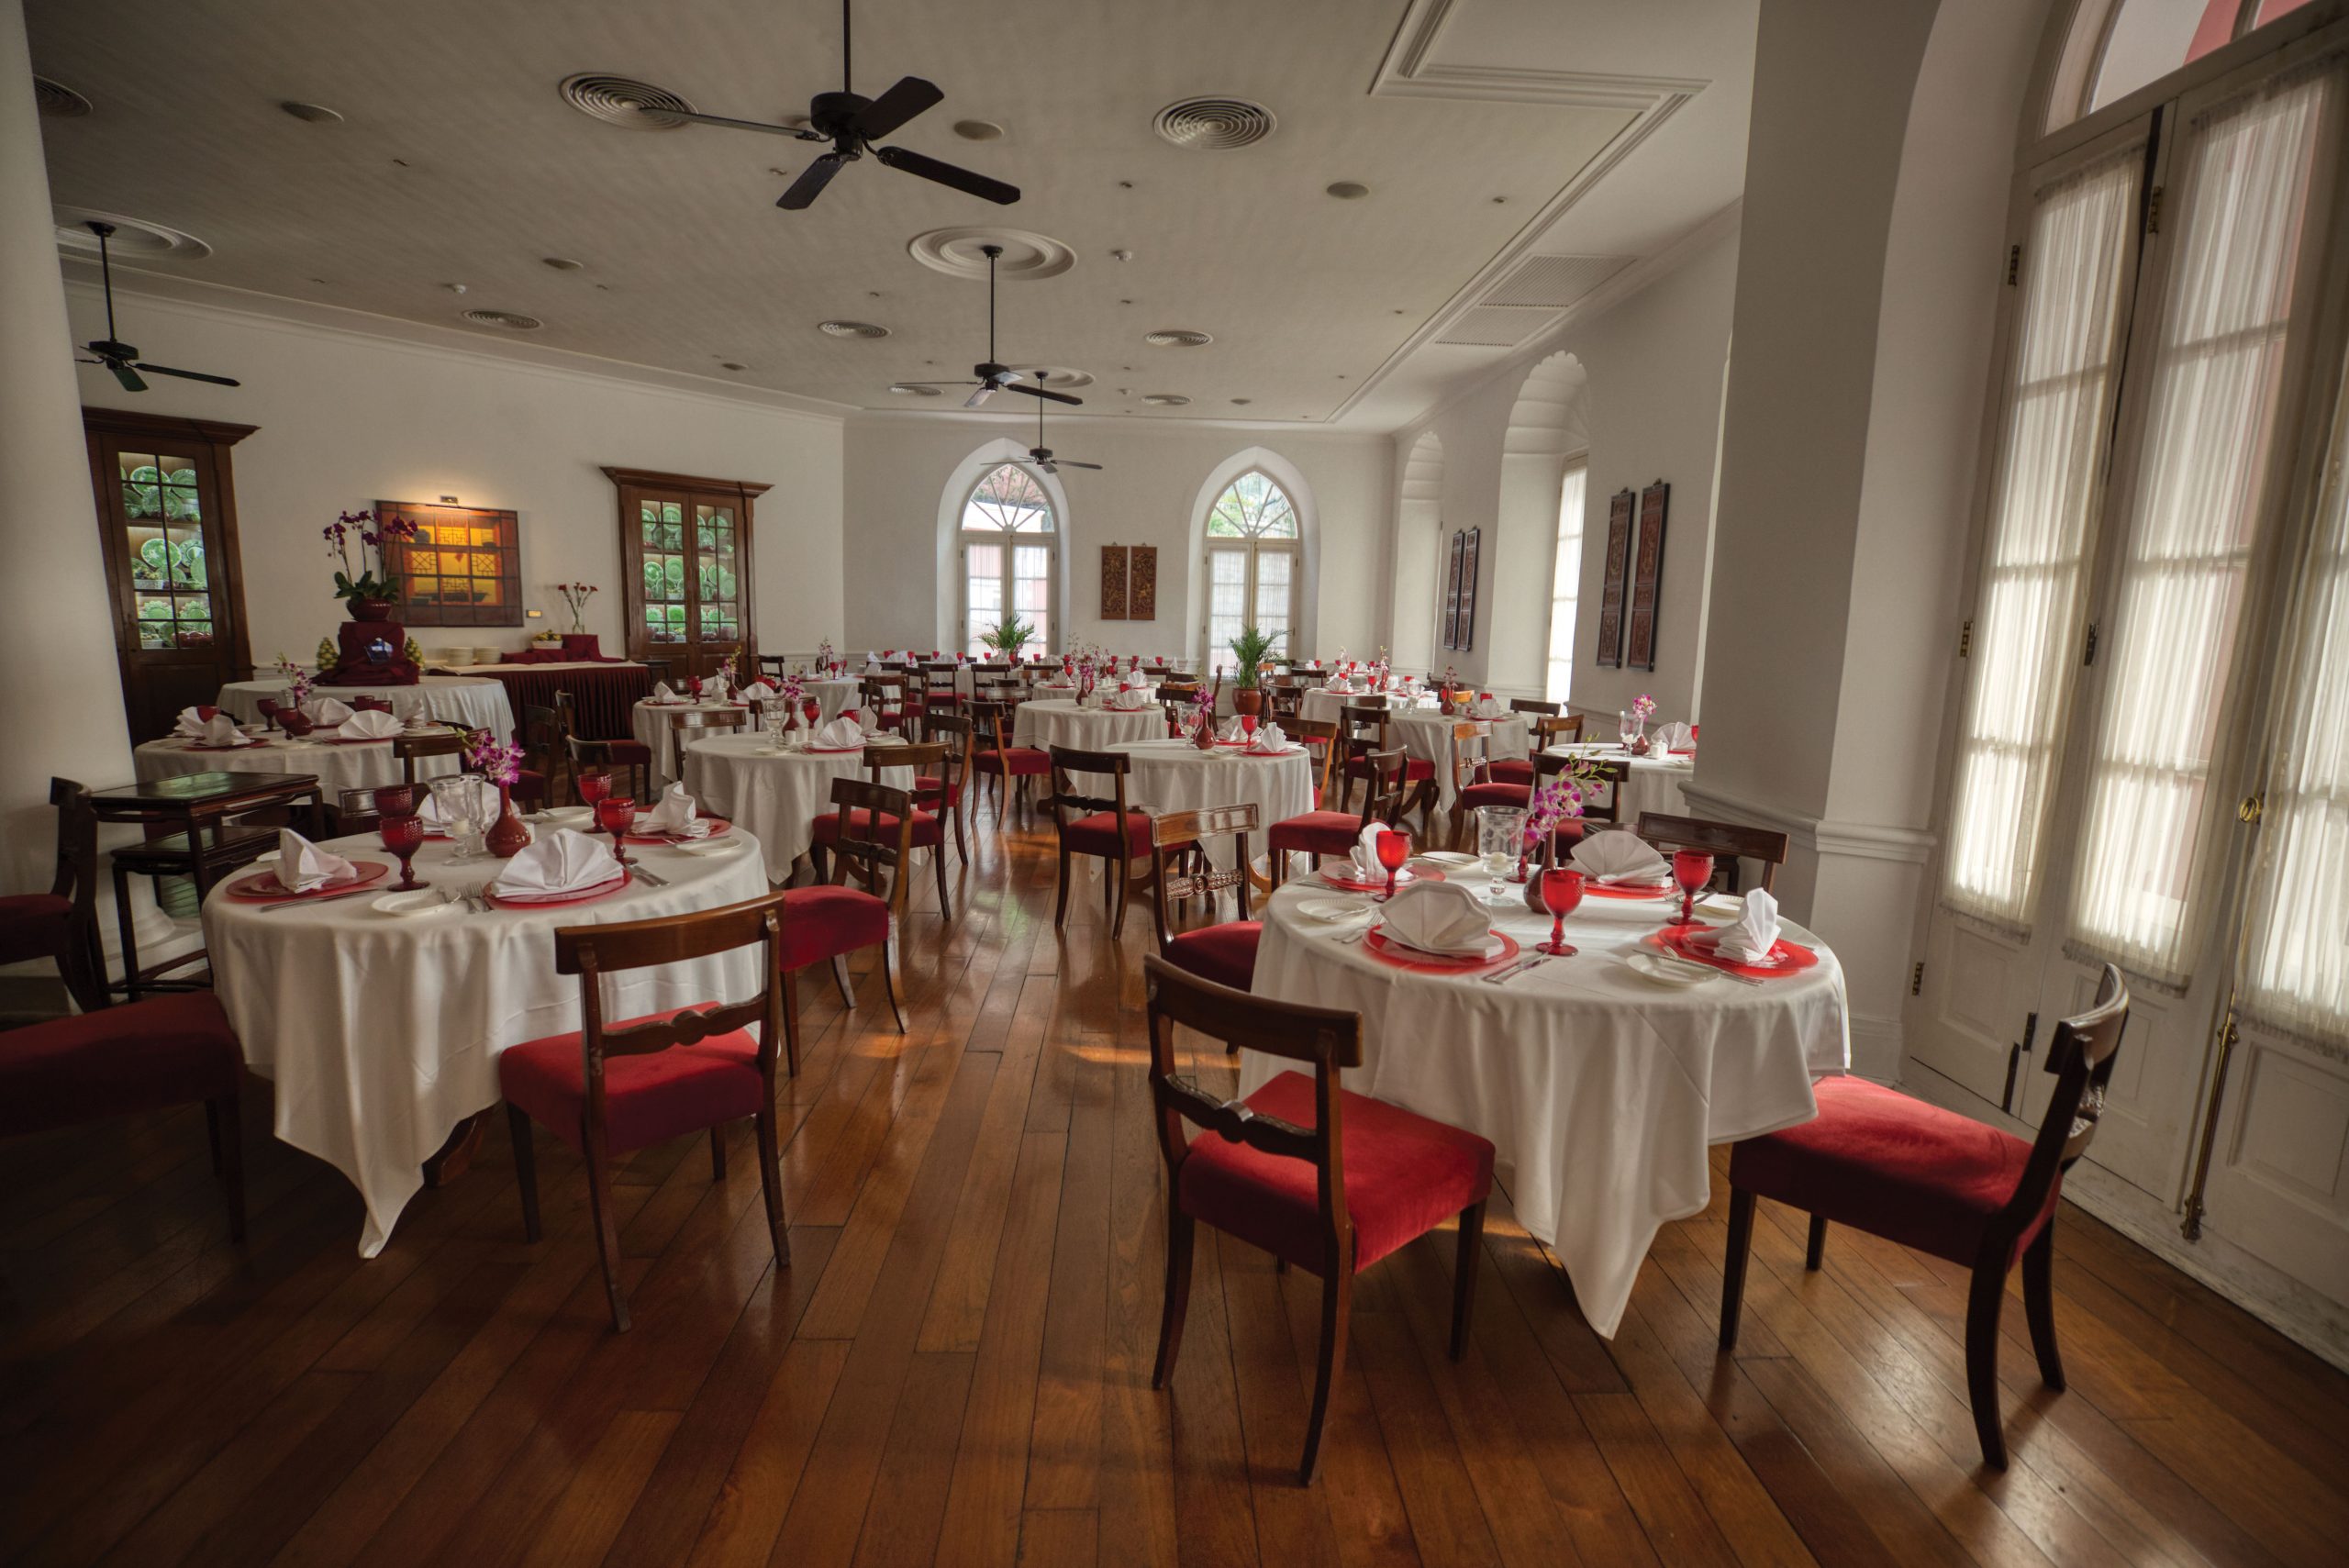 The club’s ornate, spacious and relaxed dining area - Photo by António Sanmarful